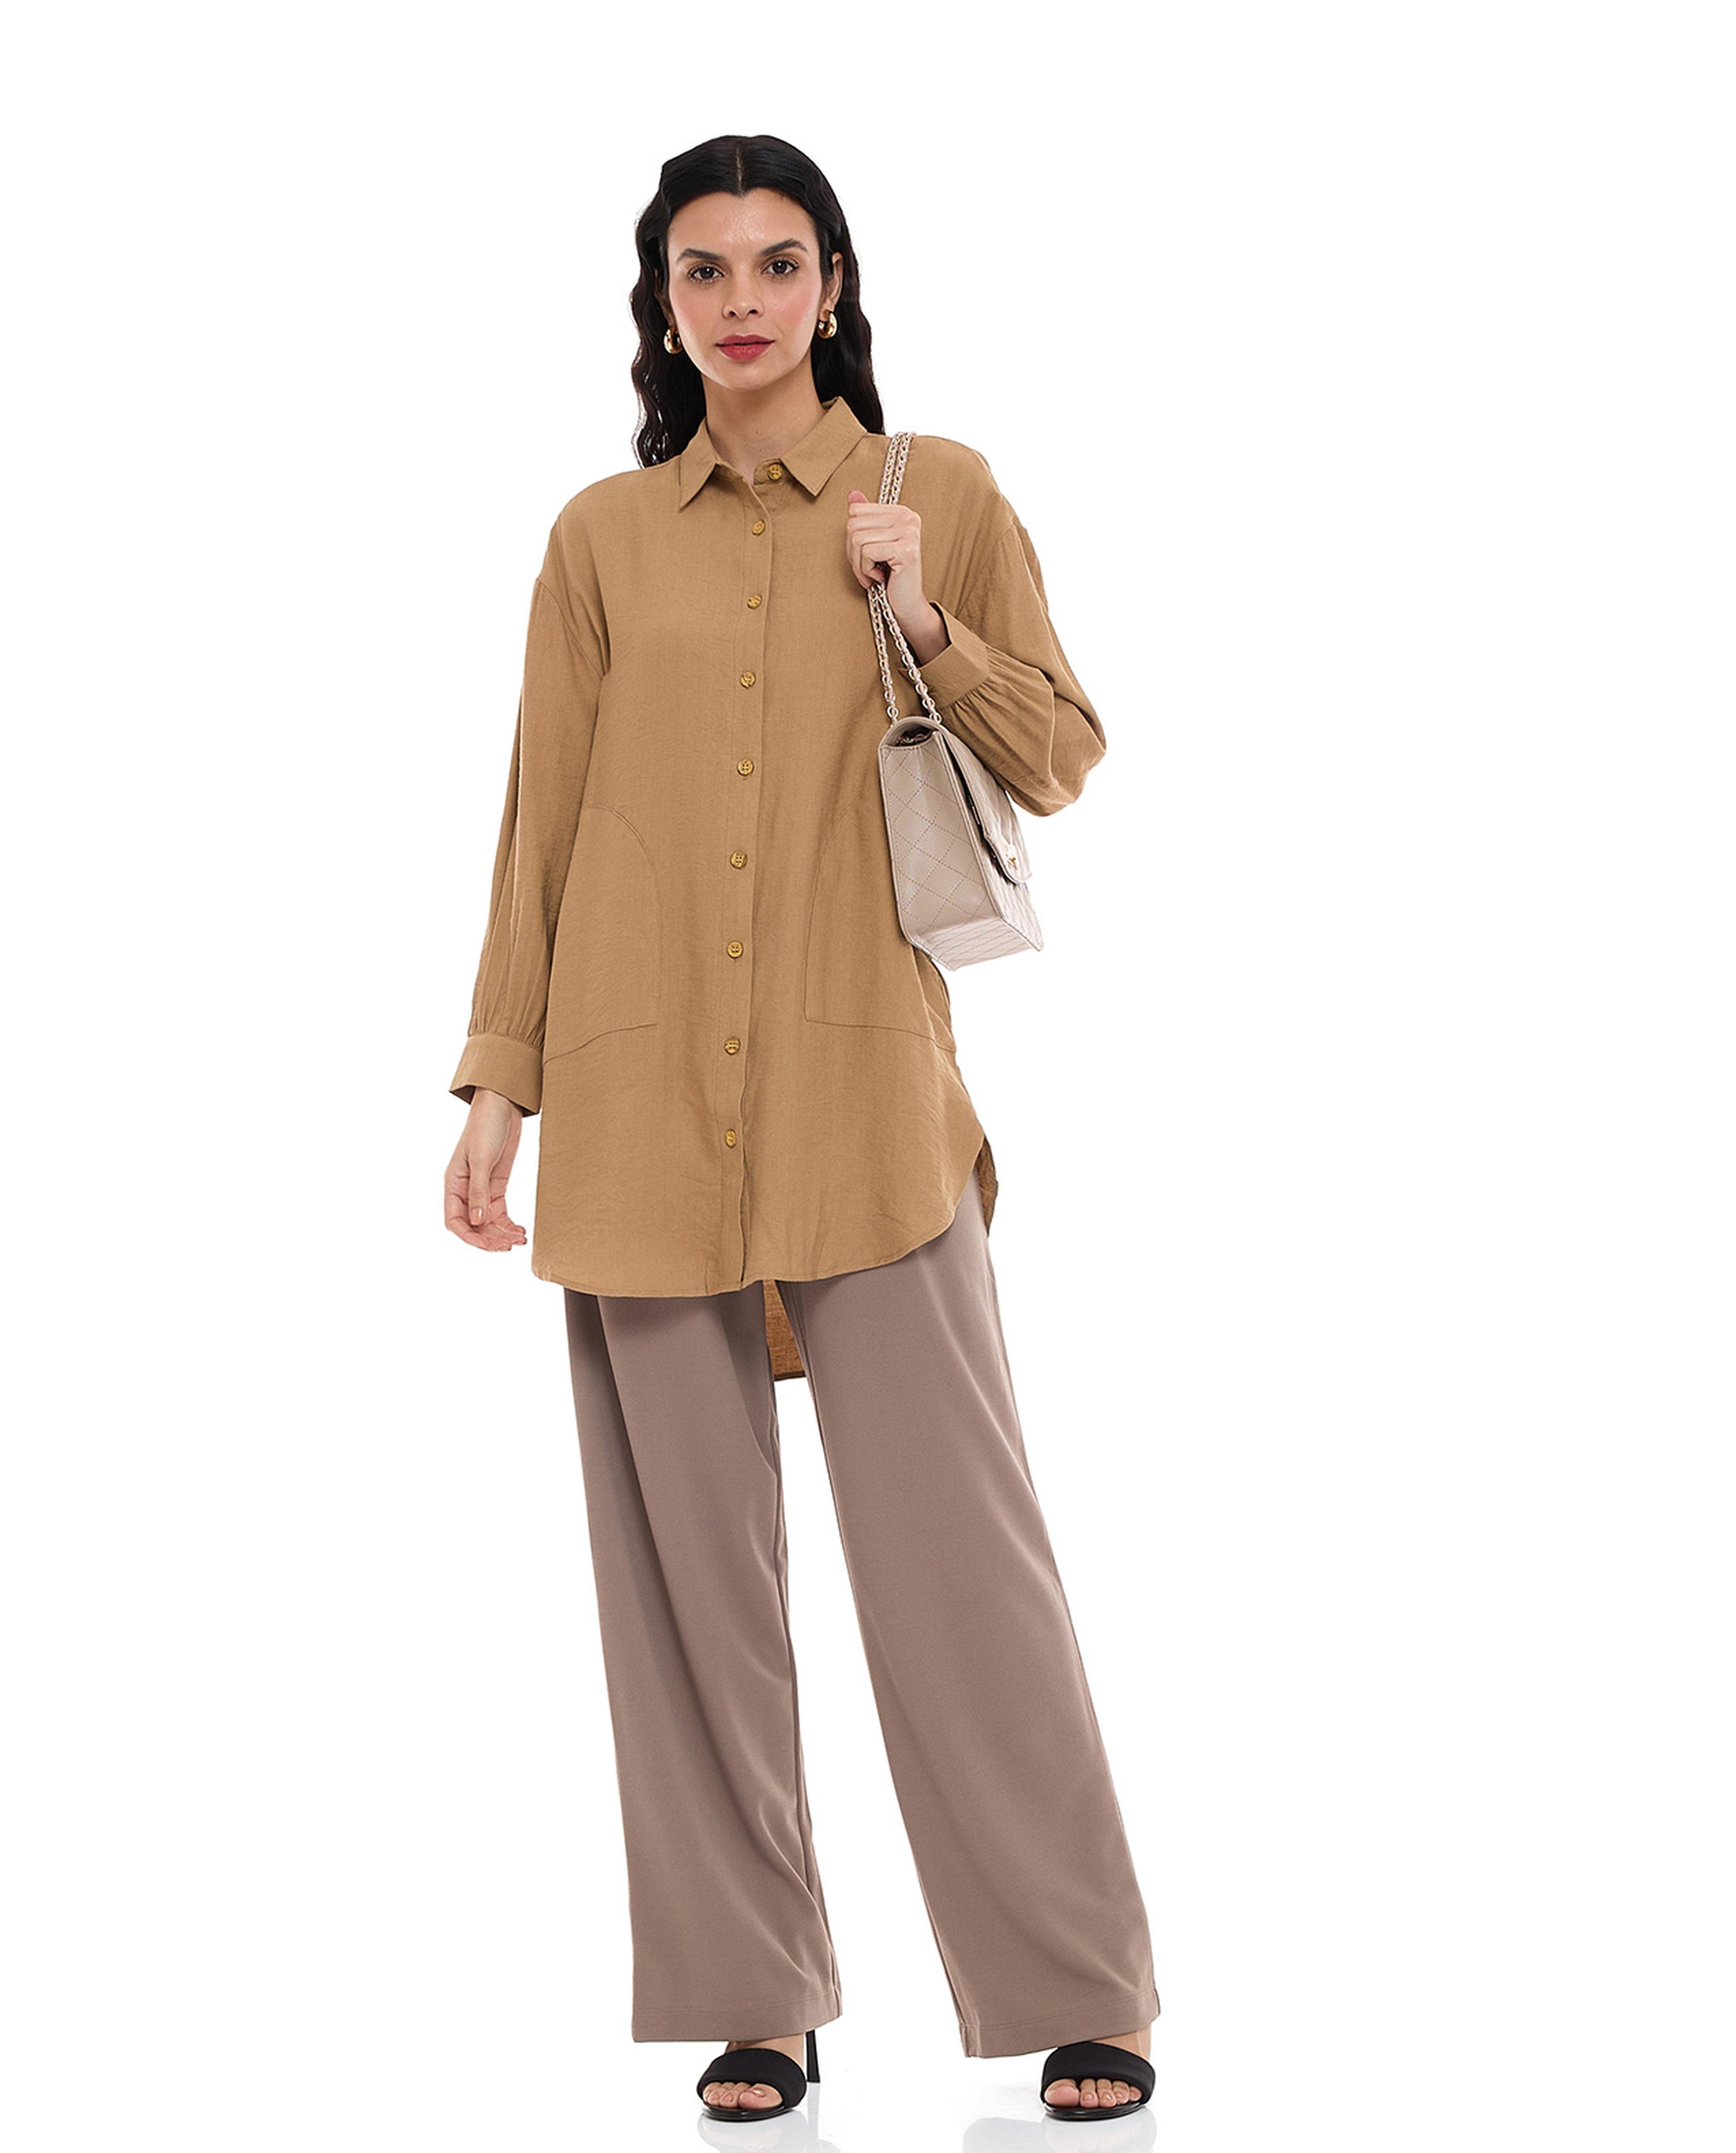 Solid Tunic with Classic Collar and Long Sleeves